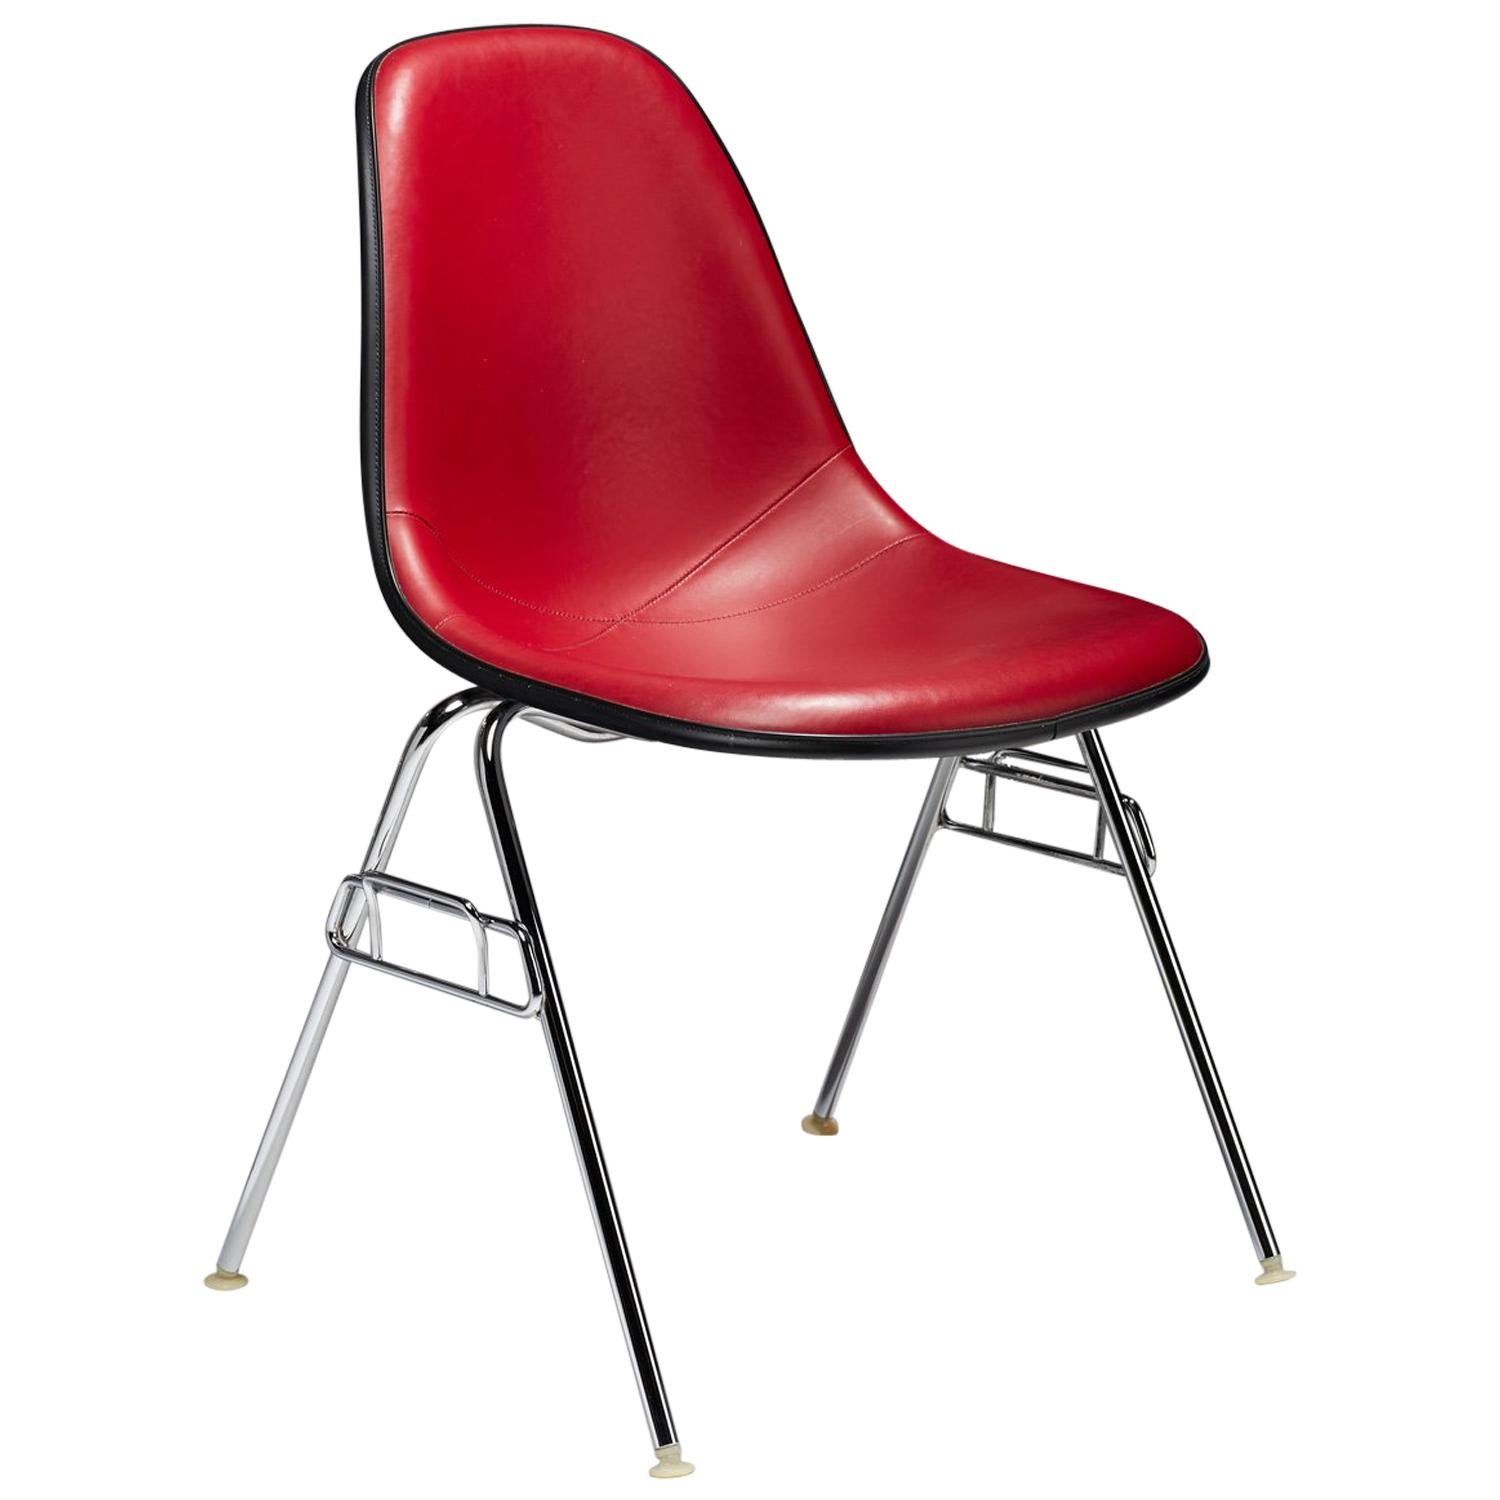 Eames Red Padded Vinyl Molded Fiberglass Shell Chairs by Herman Miller, 1980s